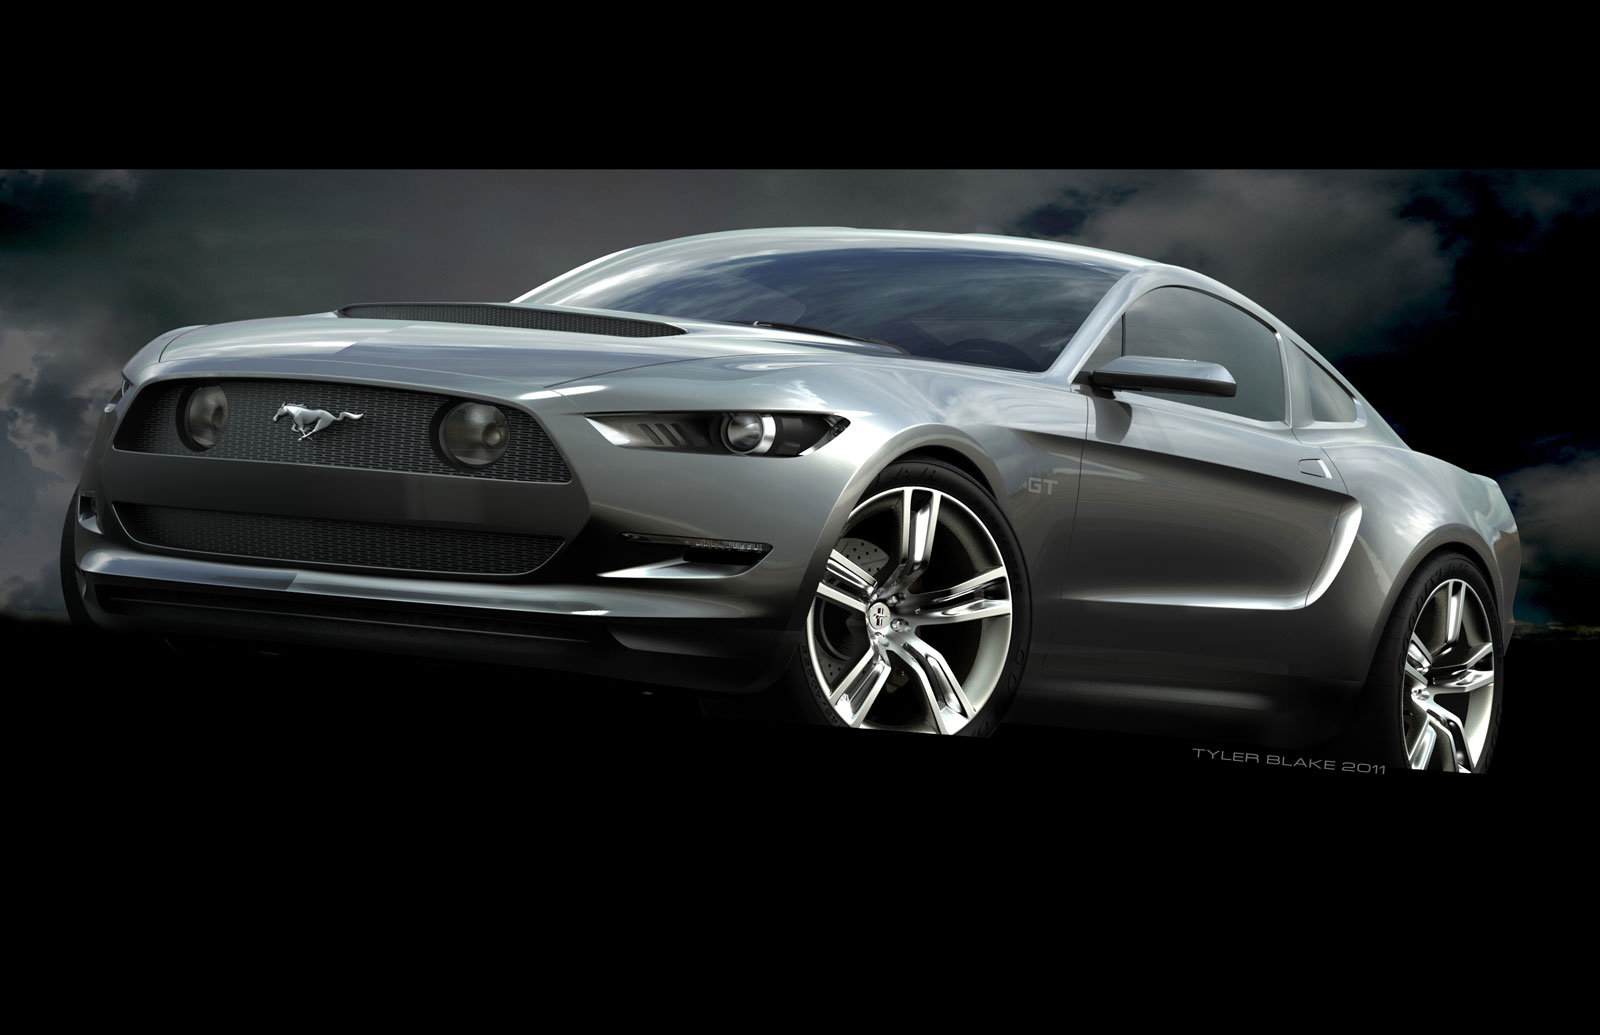 S650 Mustang S650 Mustang Production Starts March 2023 Claims Autoforecast Solutions 03-2015-Ford-Mustang-Concept-Model-3D-Rendering-02